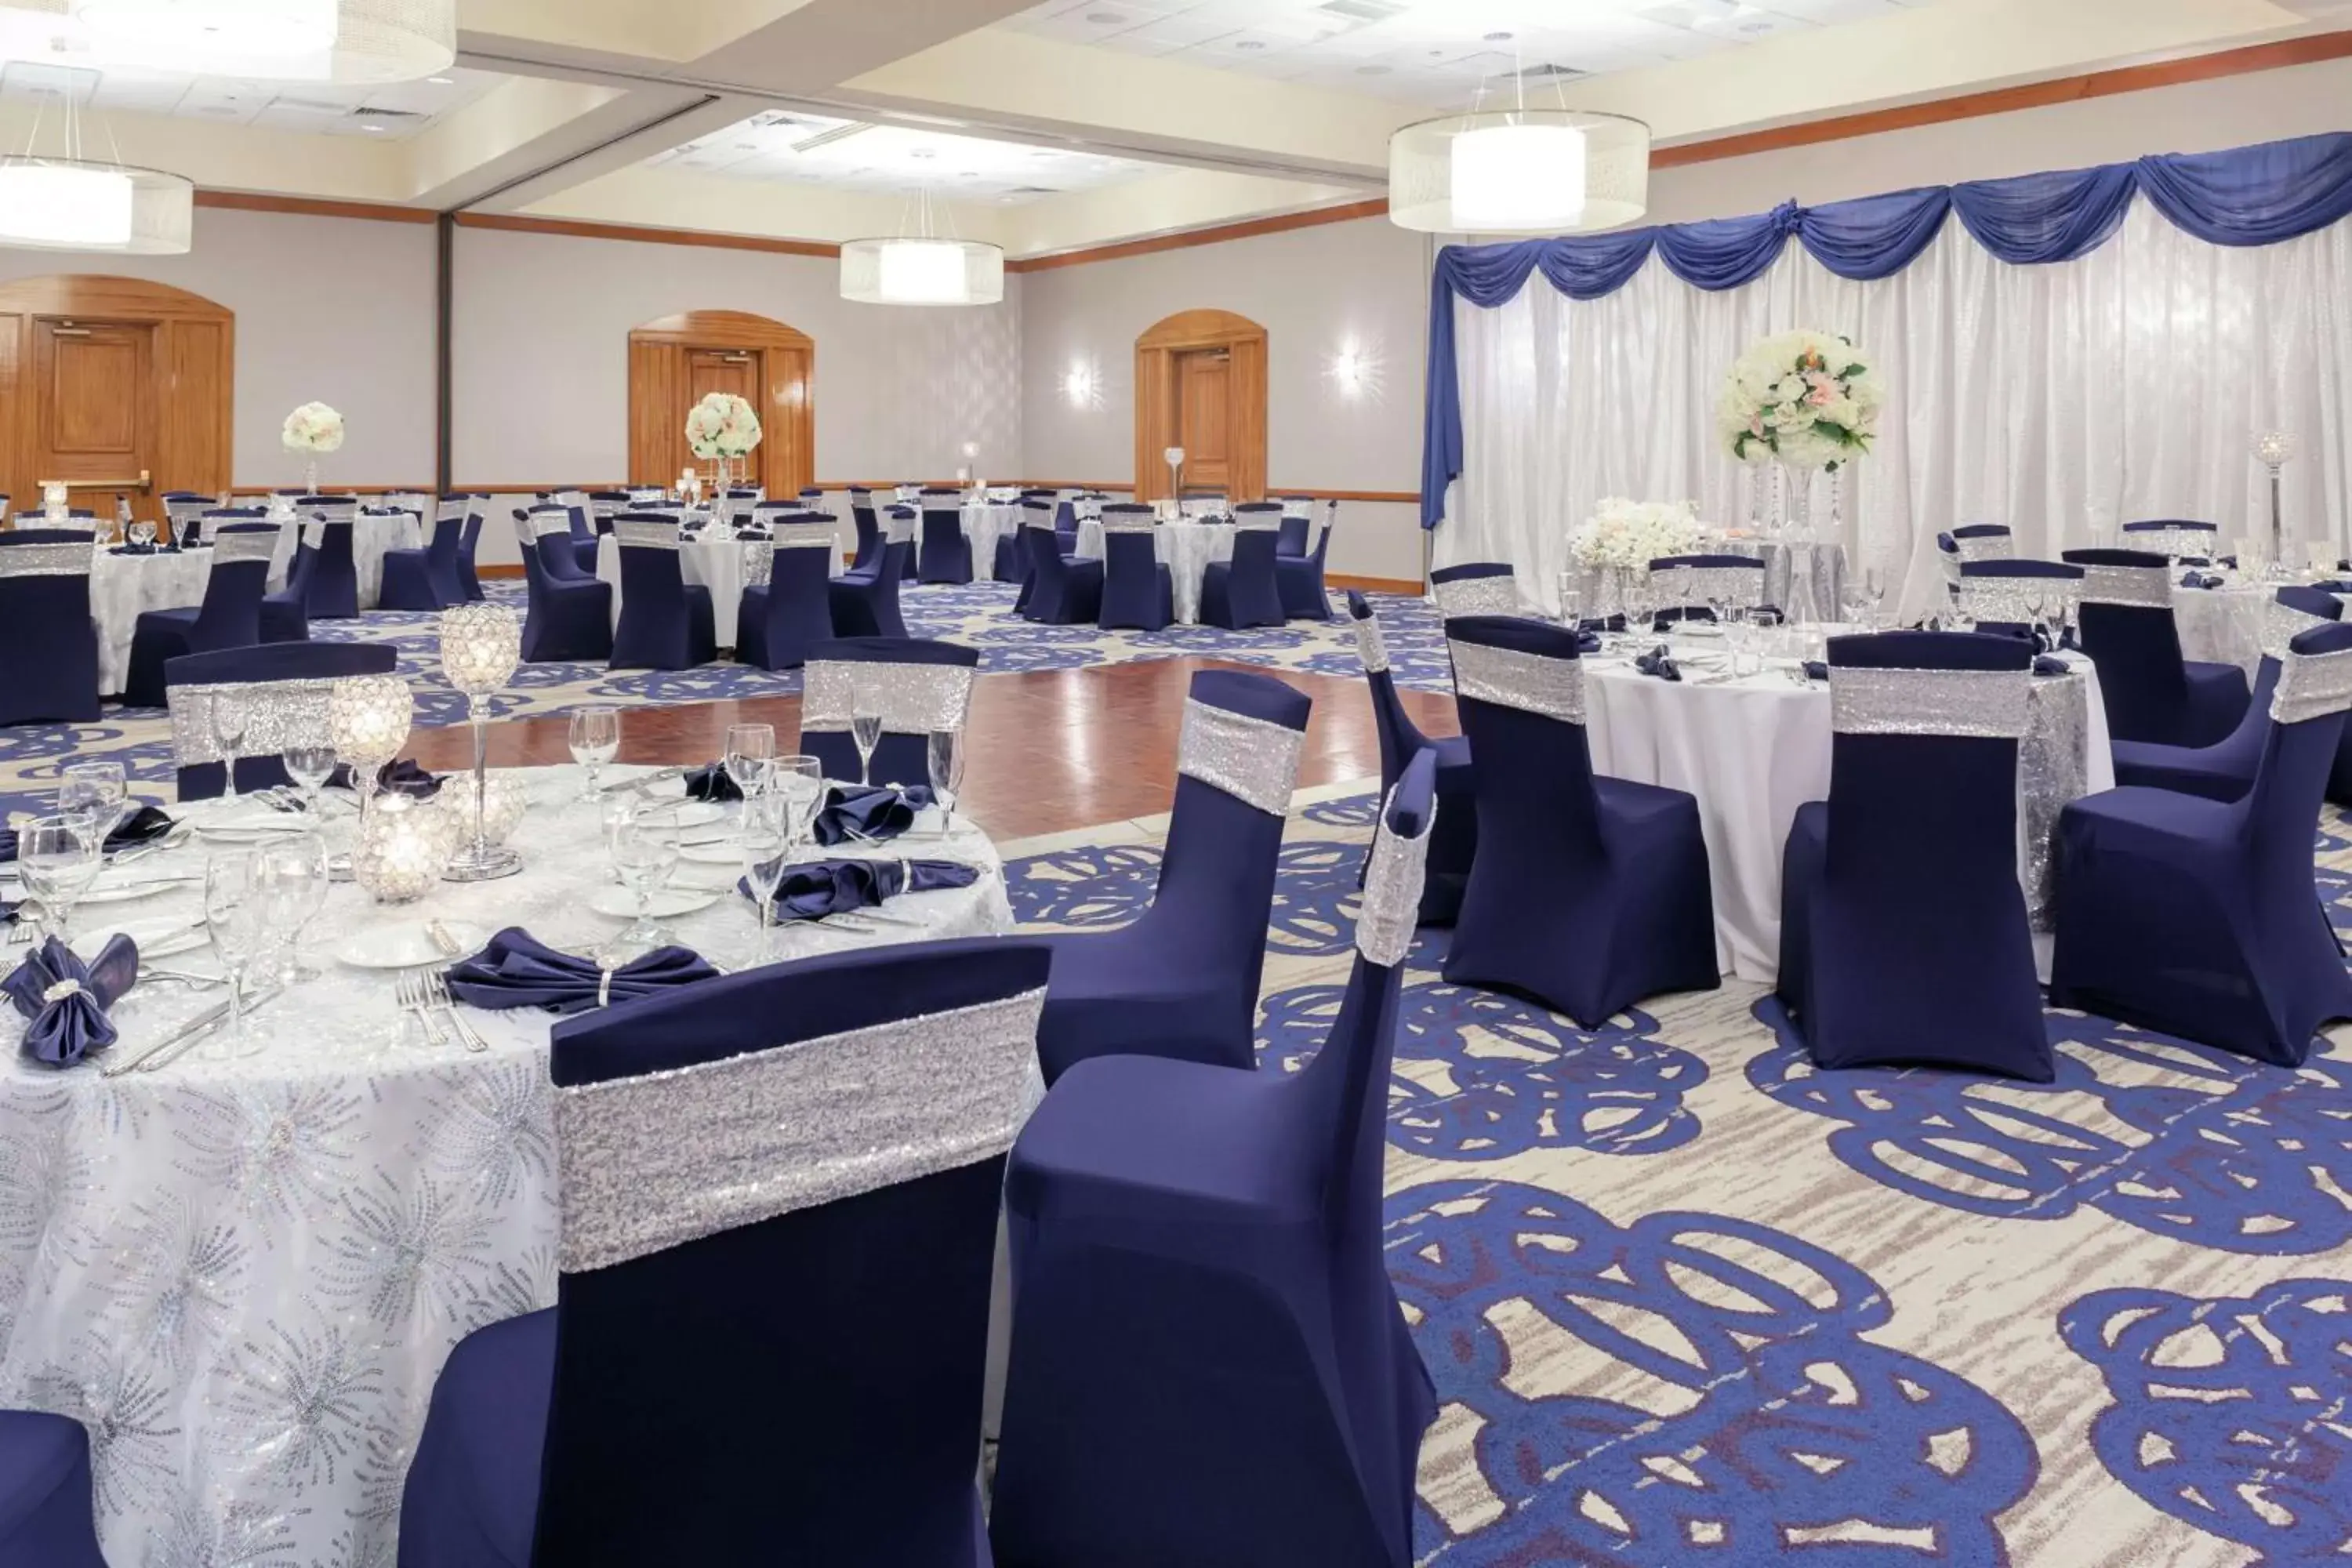 Meeting/conference room, Banquet Facilities in DoubleTree by Hilton Palm Beach Gardens